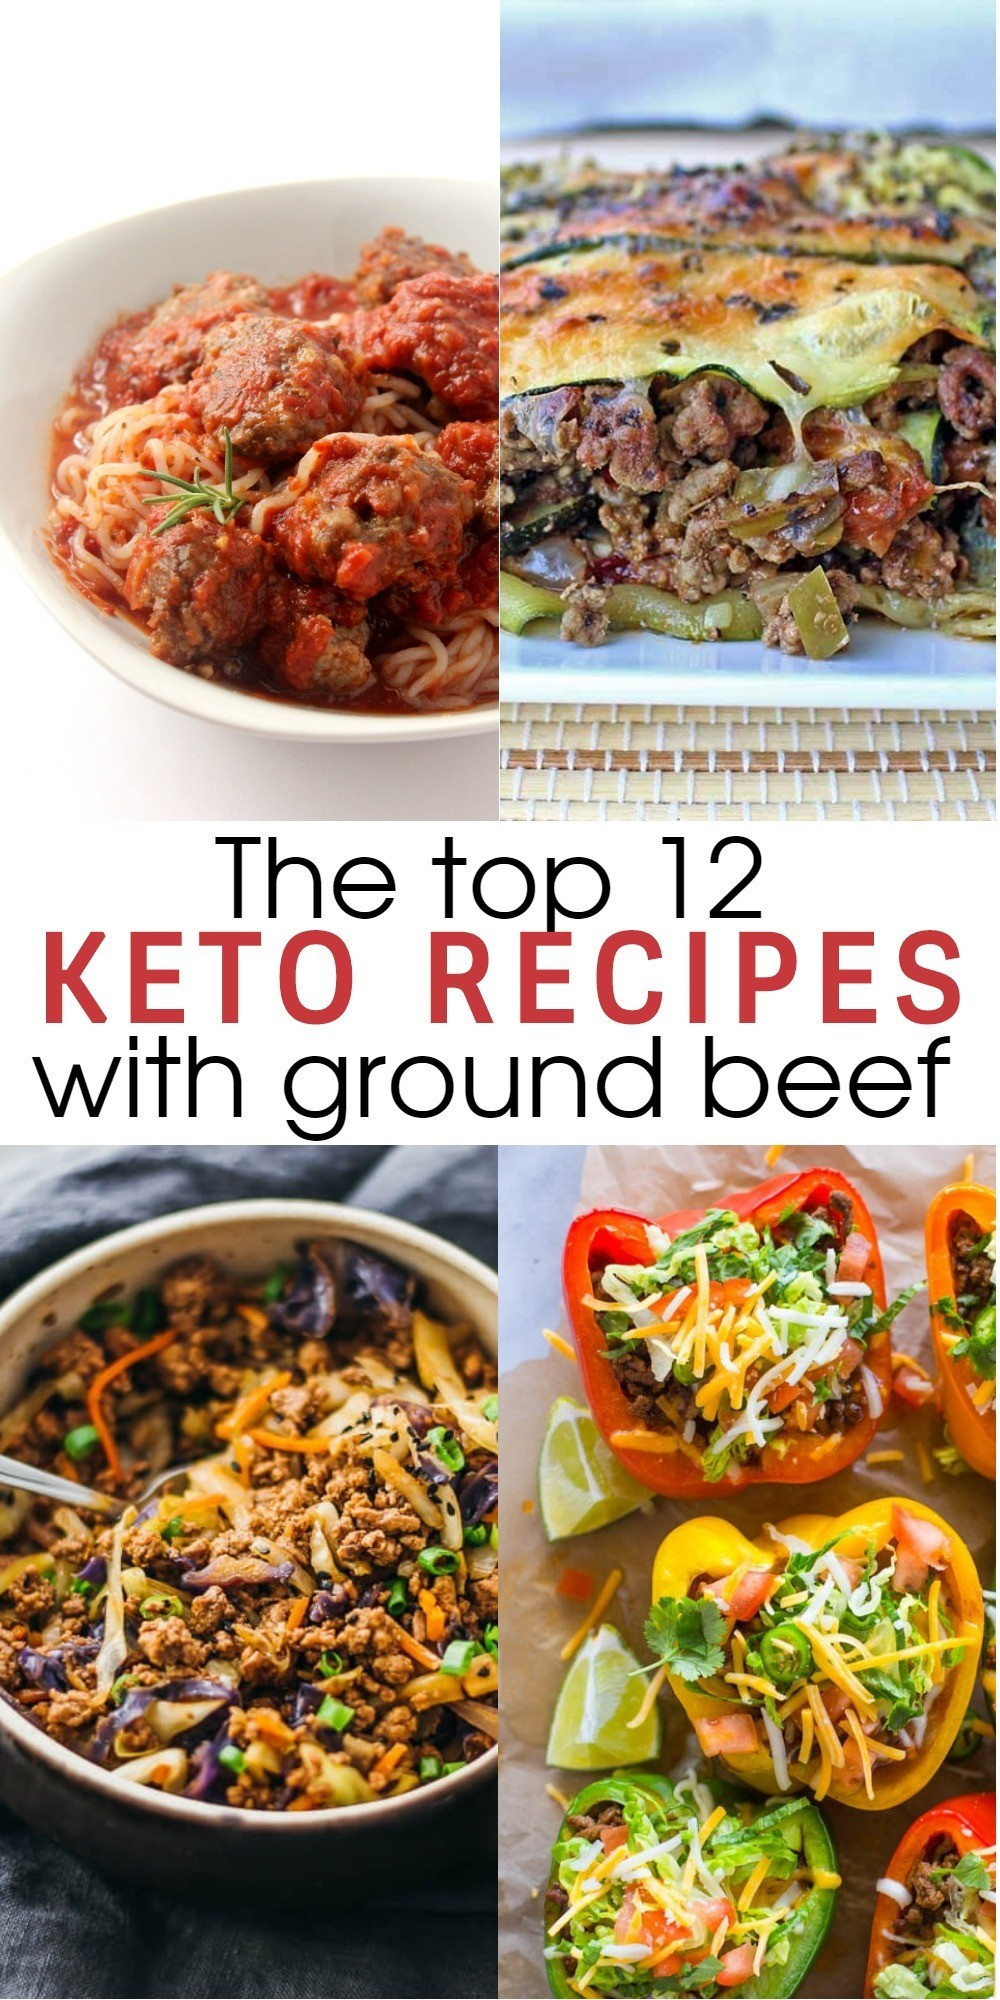 Keto Ground Beef Recipe
 12 Flavorful and Easy Keto Recipes With Ground Beef To Try